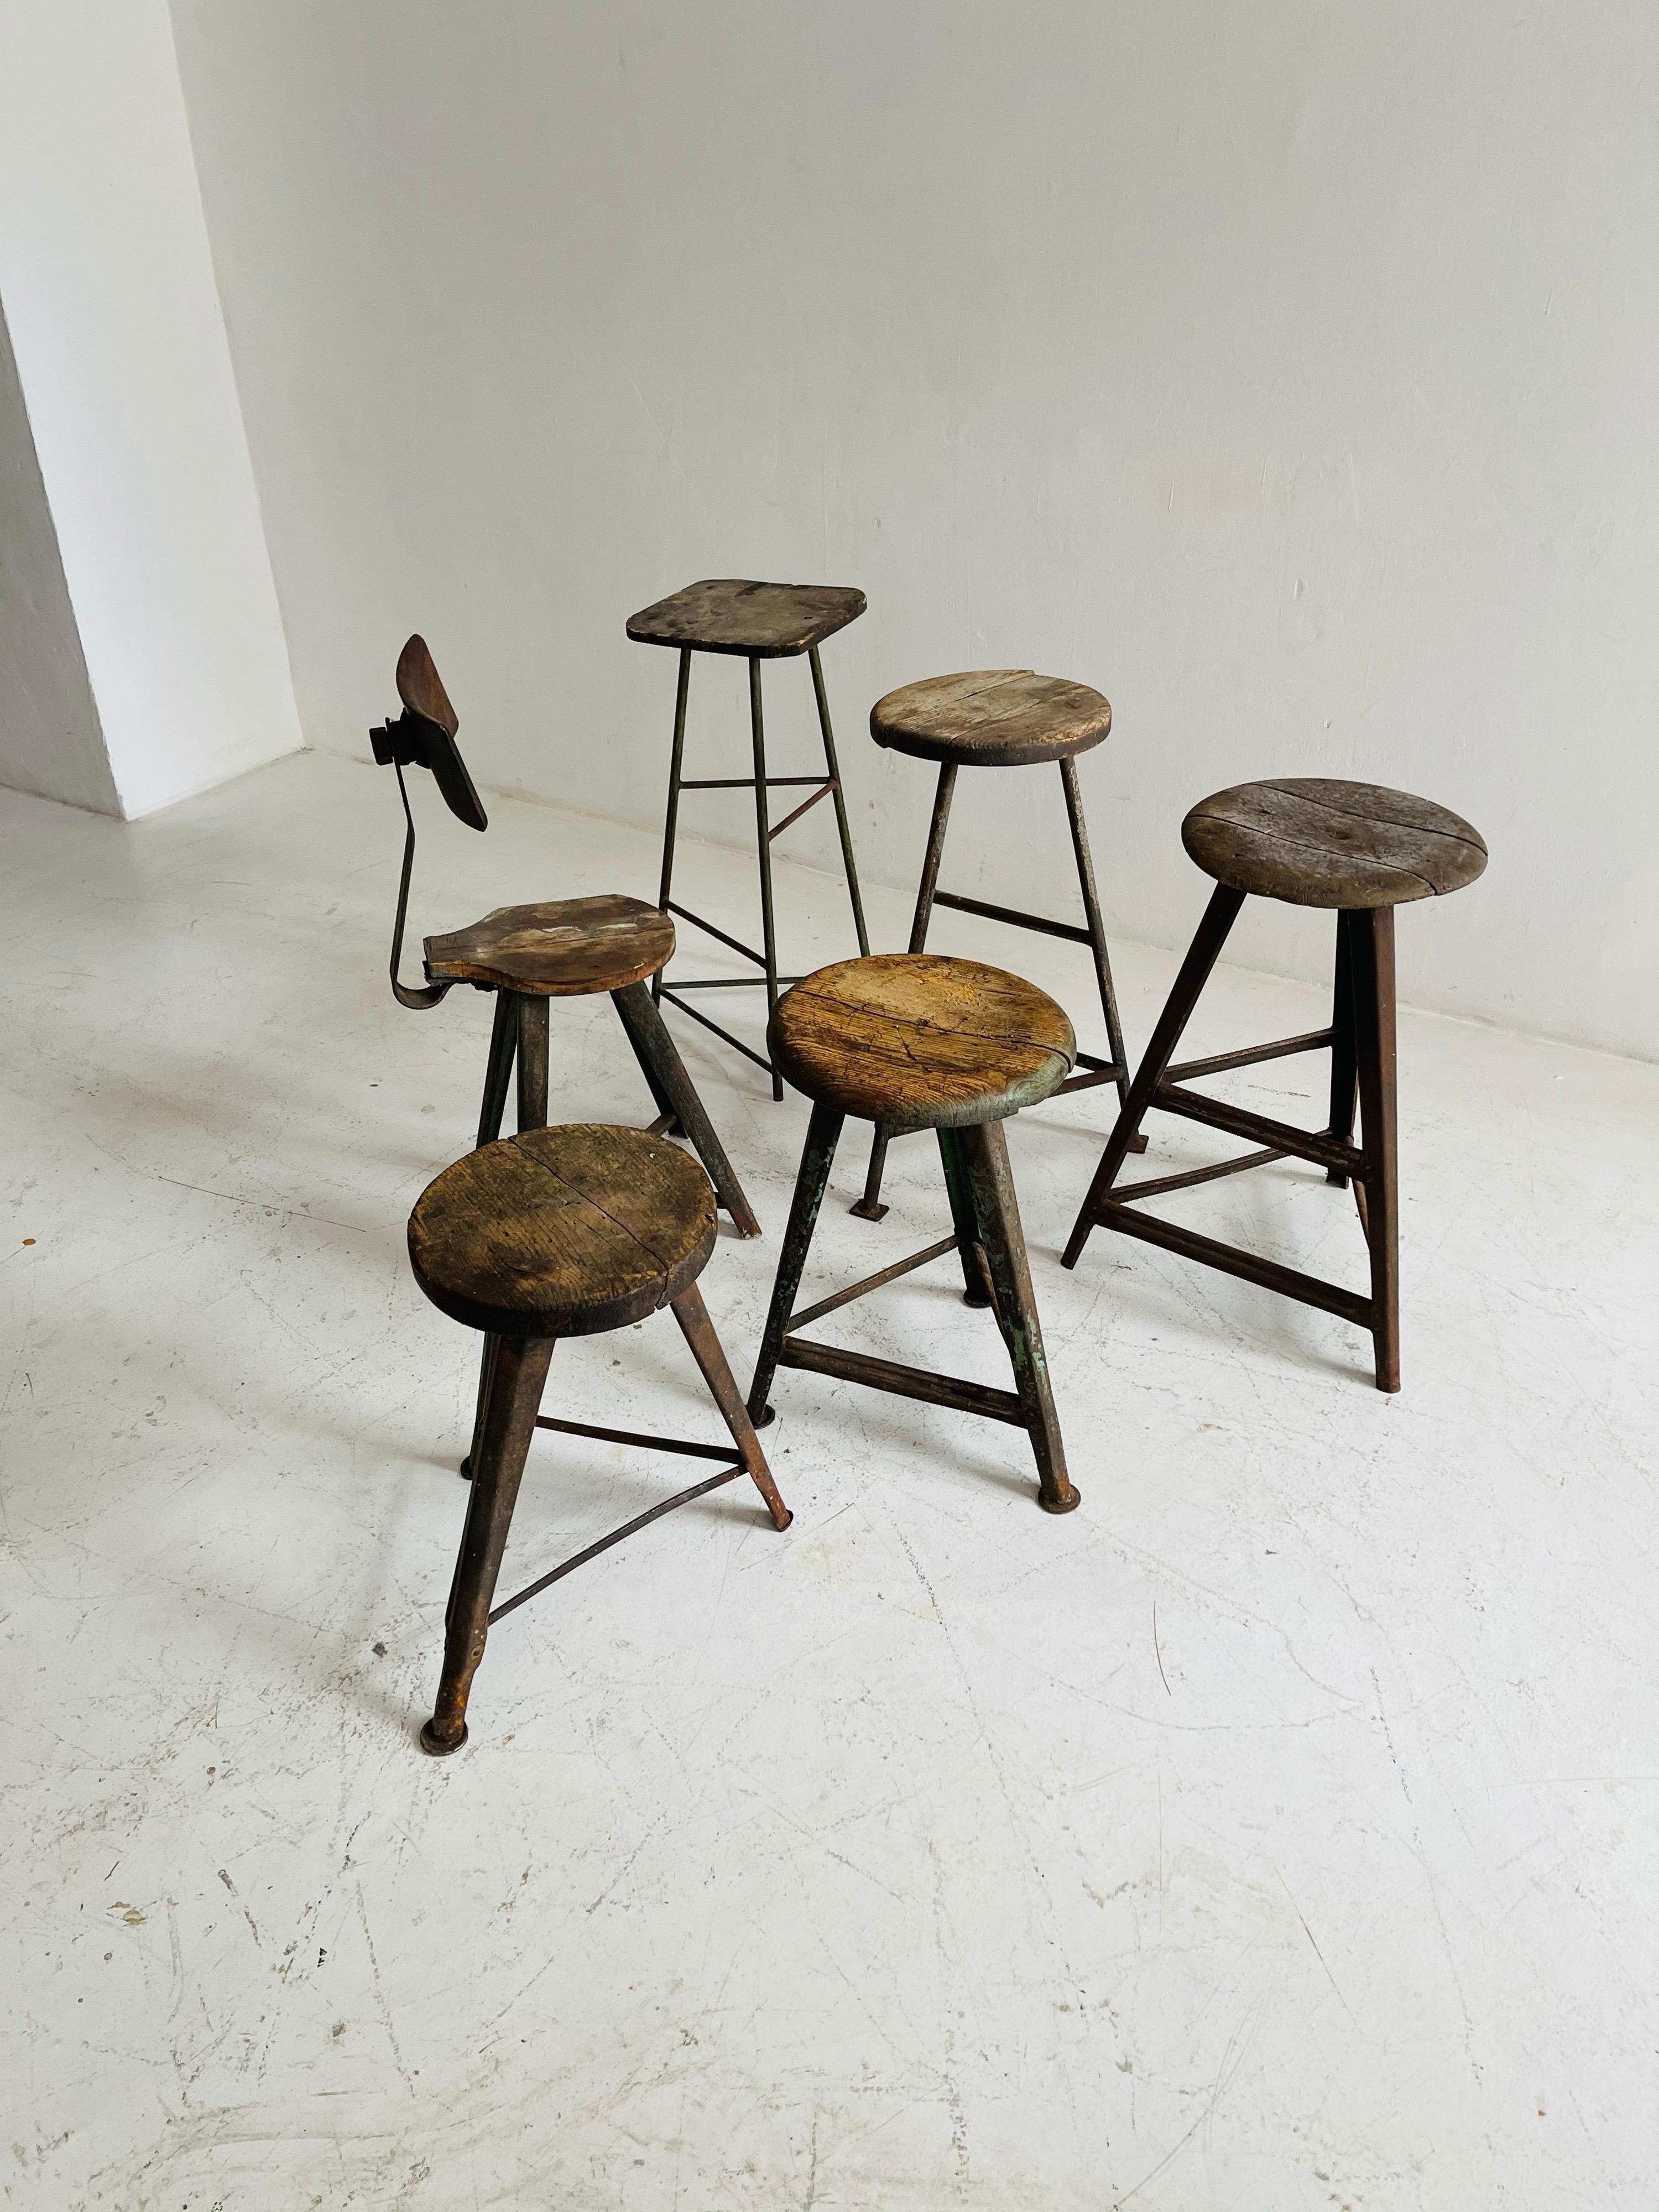 Austrian Patinated Industrial Factory Stools Group of Six, Austria, 1930s For Sale